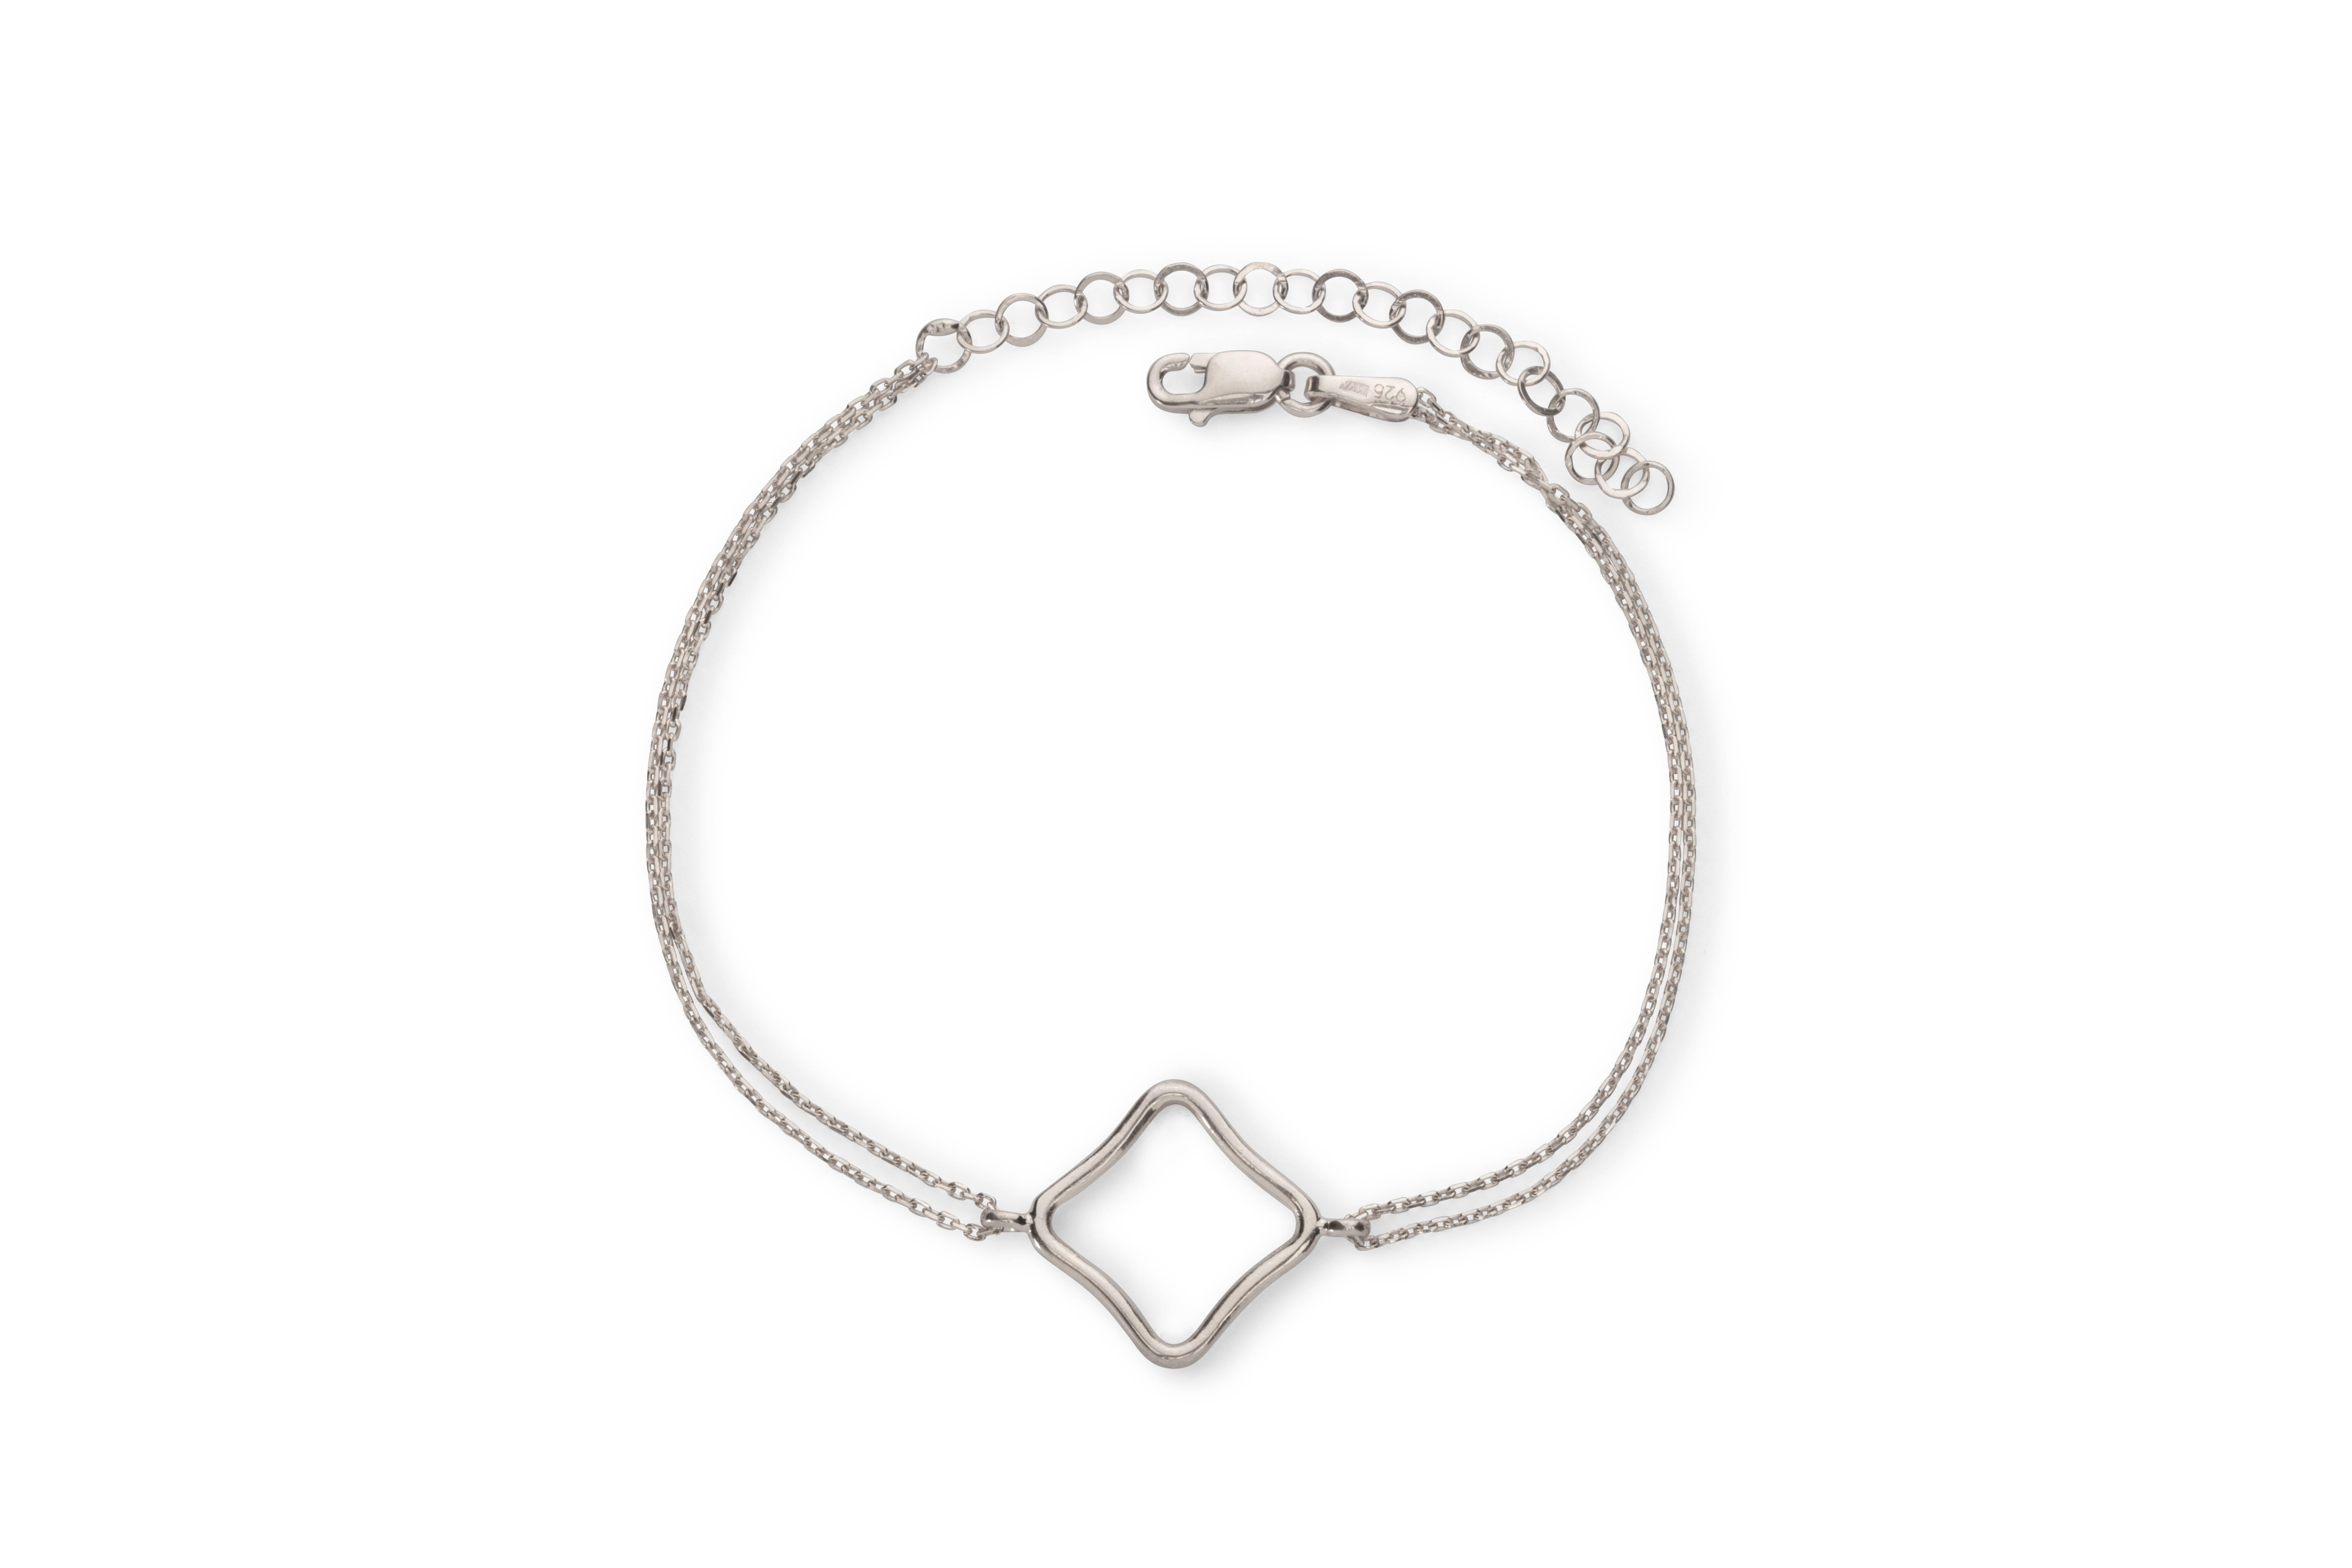 Wear these statement bracelets on their own to show off your fantastic style or layer them with our medium and small Bodrum bracelets for a fun look. This vermeil bracelet features a 15x15mm Maviada logo design 1.5mm thick, with a dual thin chain on